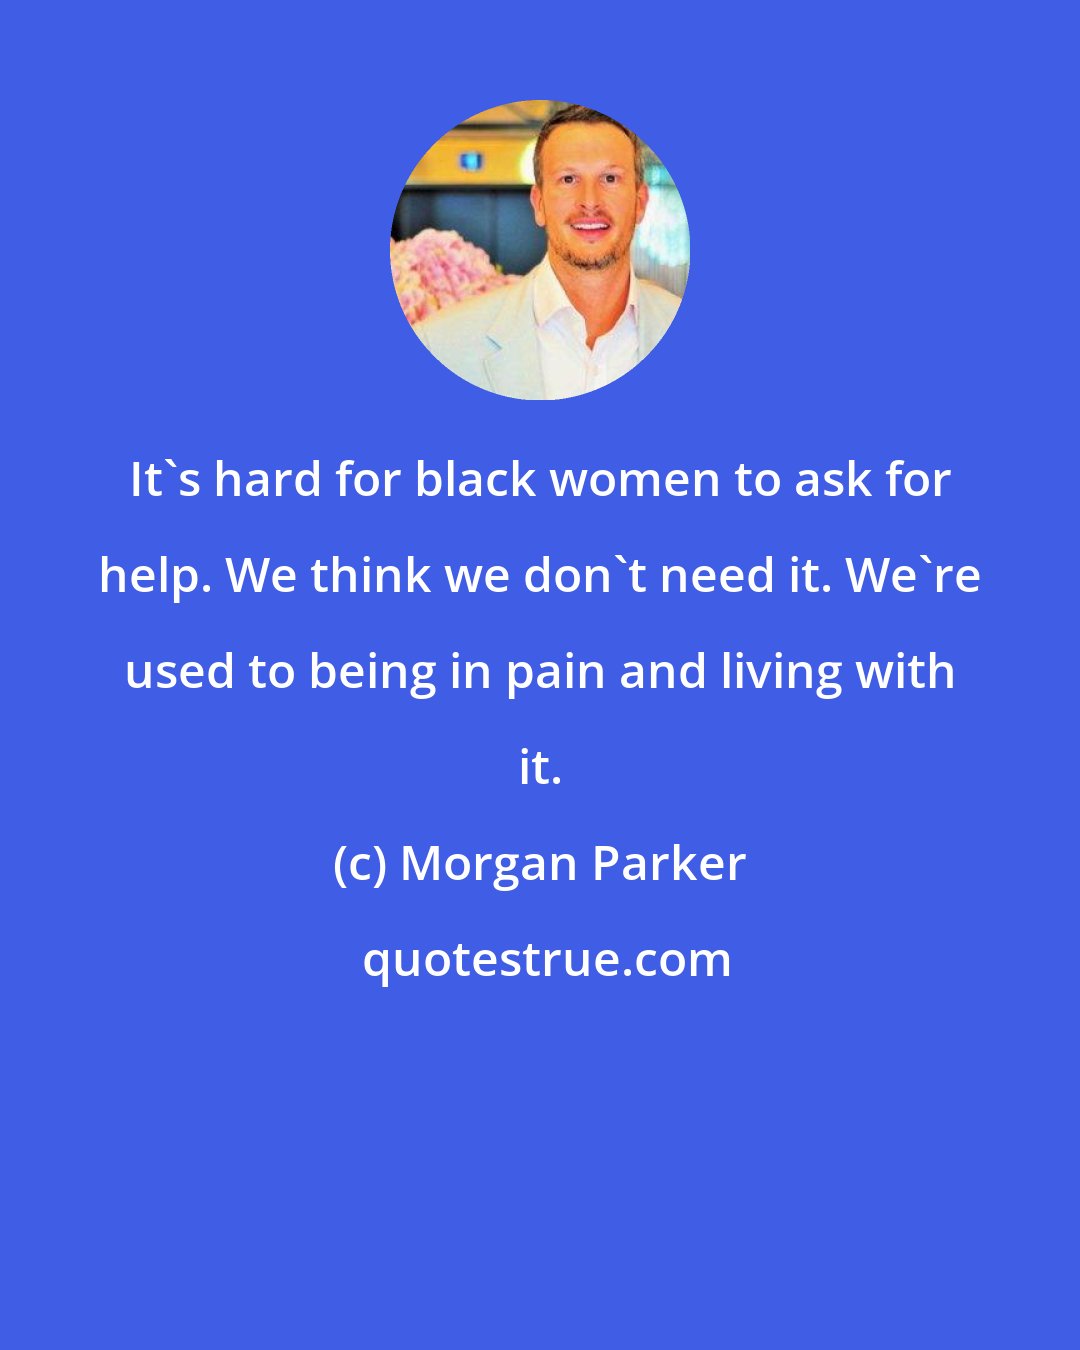 Morgan Parker: It's hard for black women to ask for help. We think we don't need it. We're used to being in pain and living with it.